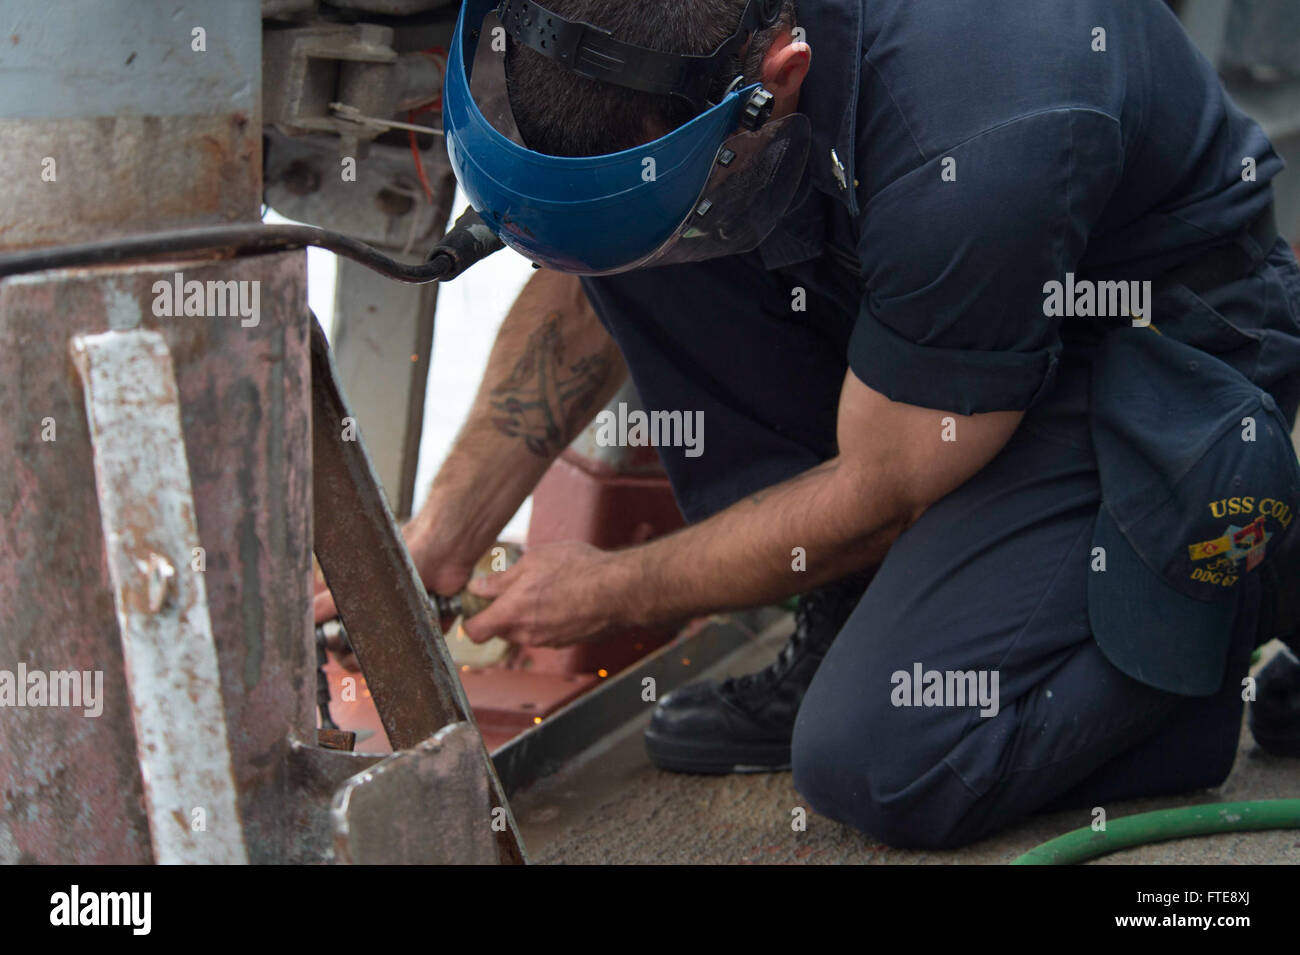 150127-N-TC720-044 MEDITERRANEAN SEA (Jan. 27, 2015) Boatswain’s Mate 1st Class Alan Farthing, from Grove City, Ohio, conducts preventative maintenance aboard USS Cole (DDG 67) Jan. 27, 2015. Cole, an Arleigh Burke-class guided-missile destroyer, homeported in Norfolk, is conducting naval operations in the U.S. 6th Fleet area of operations in support of U.S. national security interests in Europe. (U.S. Navy photo by Mass Communication Specialist 3rd Class Mat Murch/Released) Stock Photo